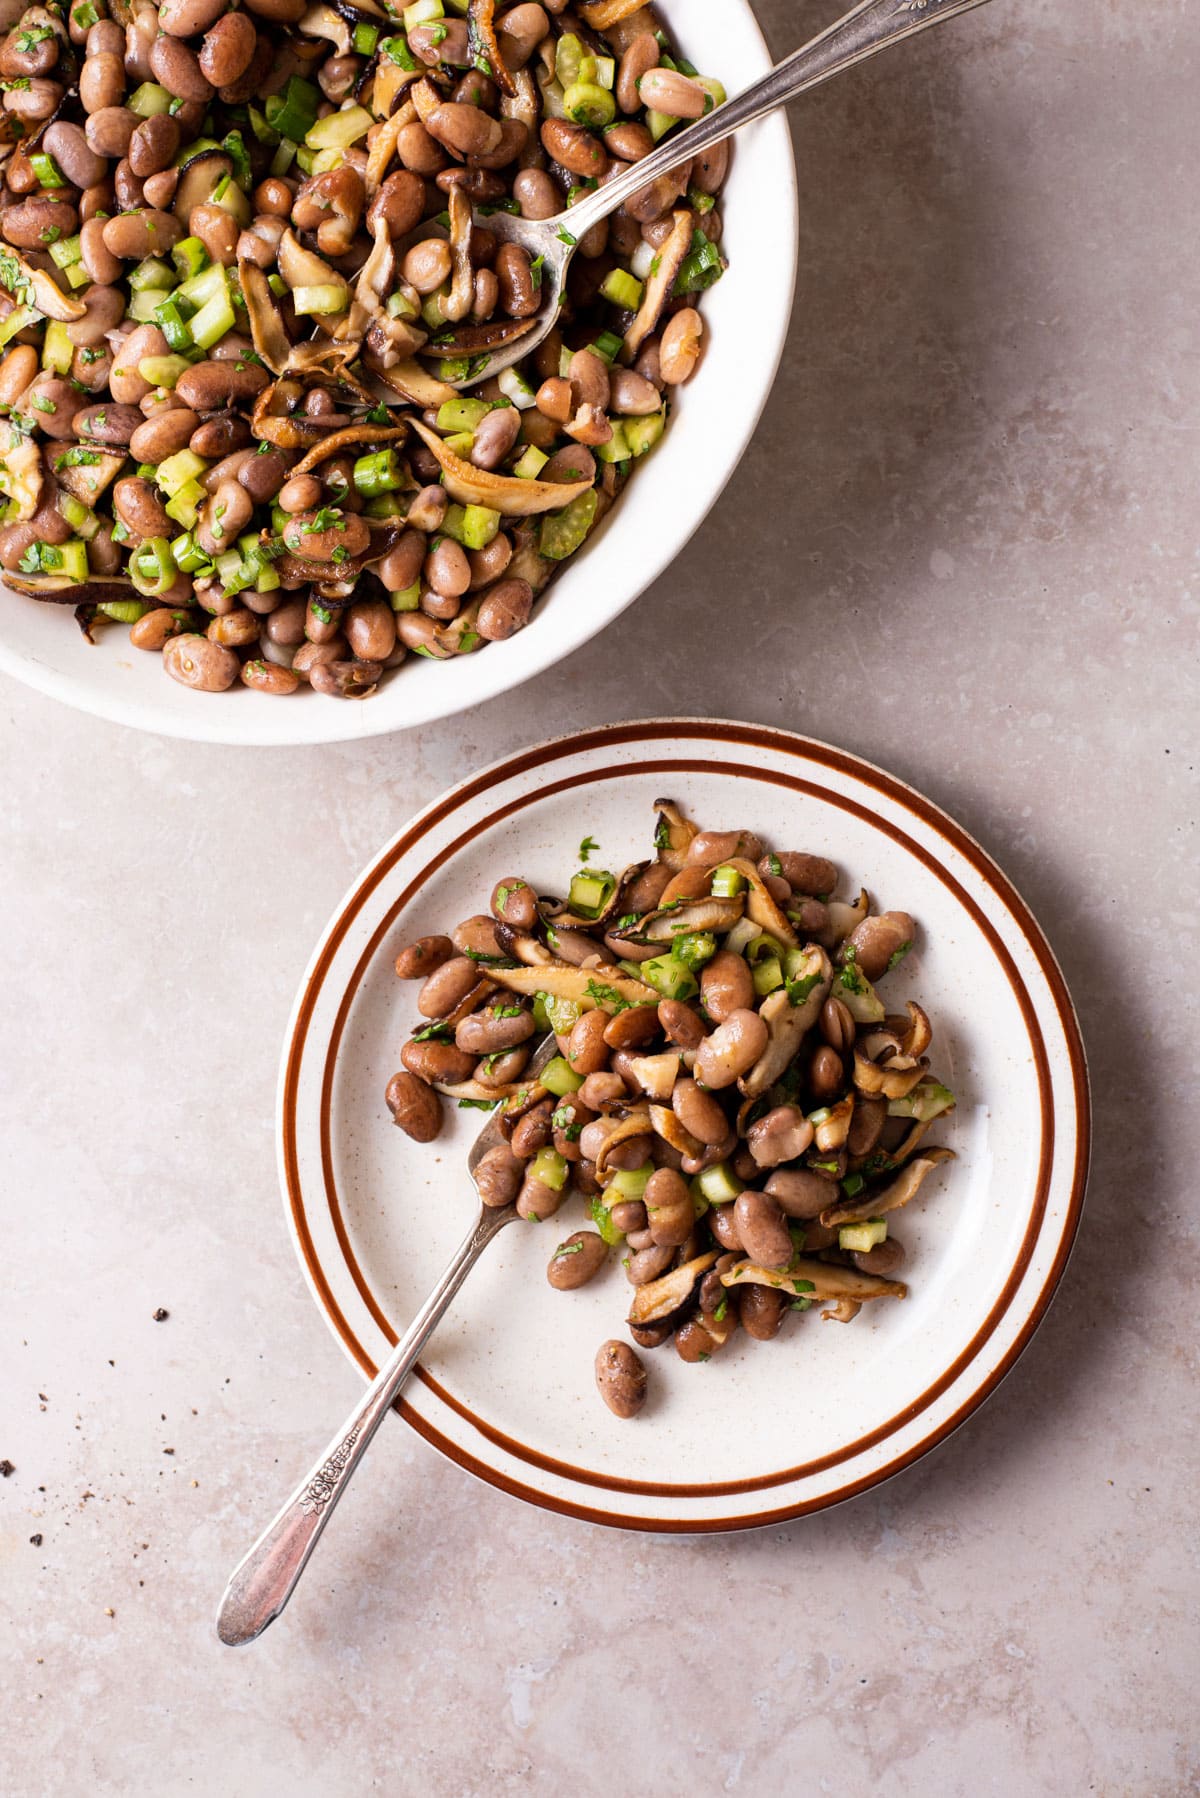 Vegan pinto bean salad in a white bowl and served on a brown-rimmed plate.